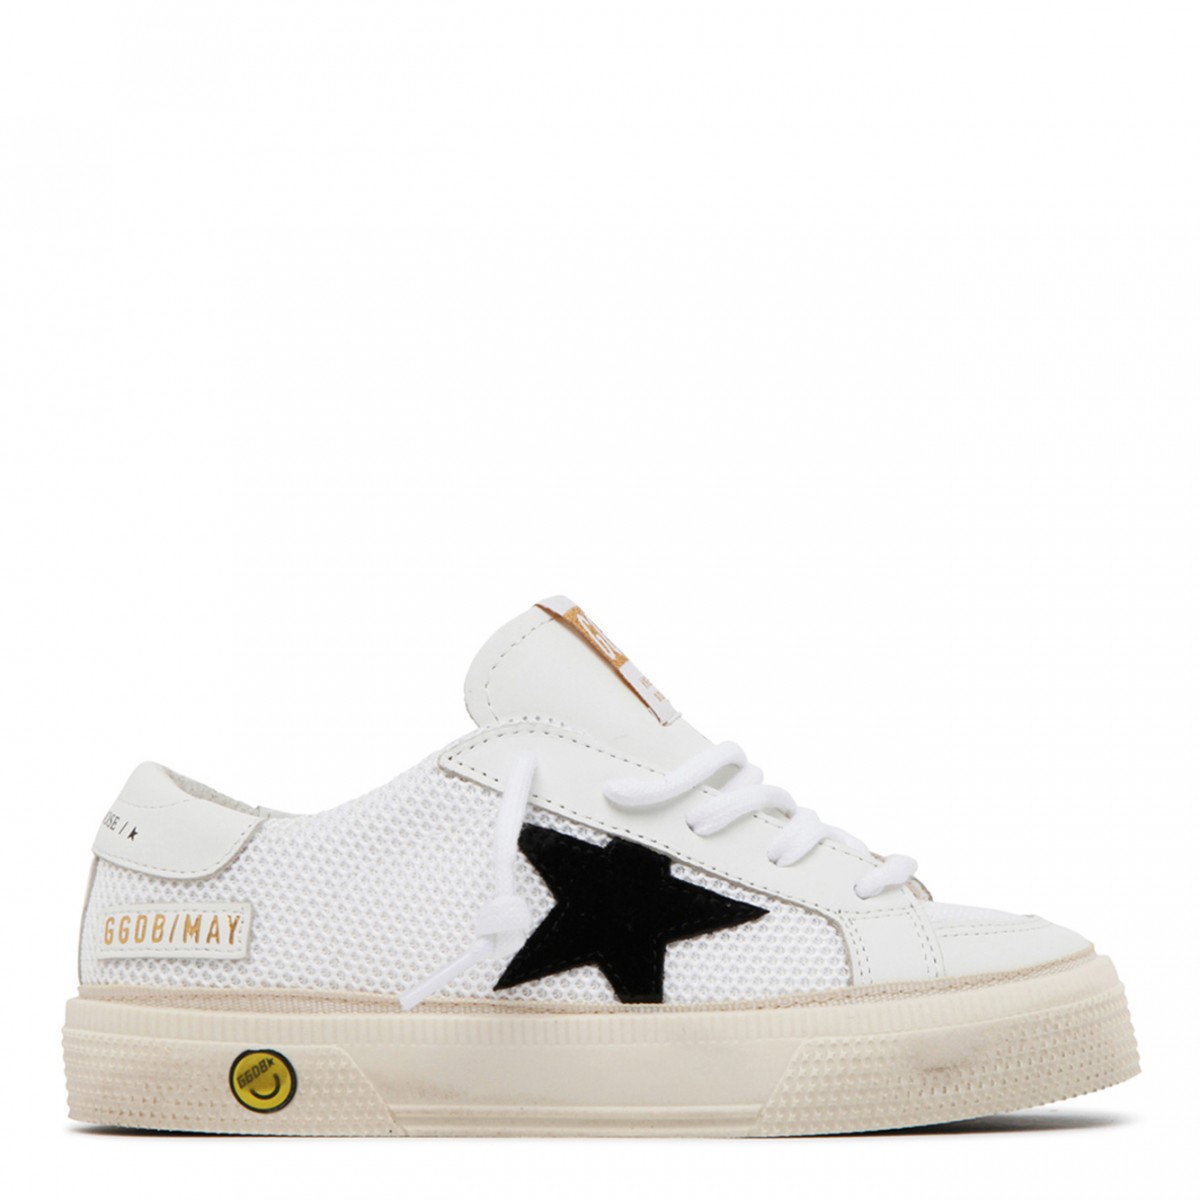 Golden Goose Kids White and Black Calf Leather May Star Patch Sneakers.